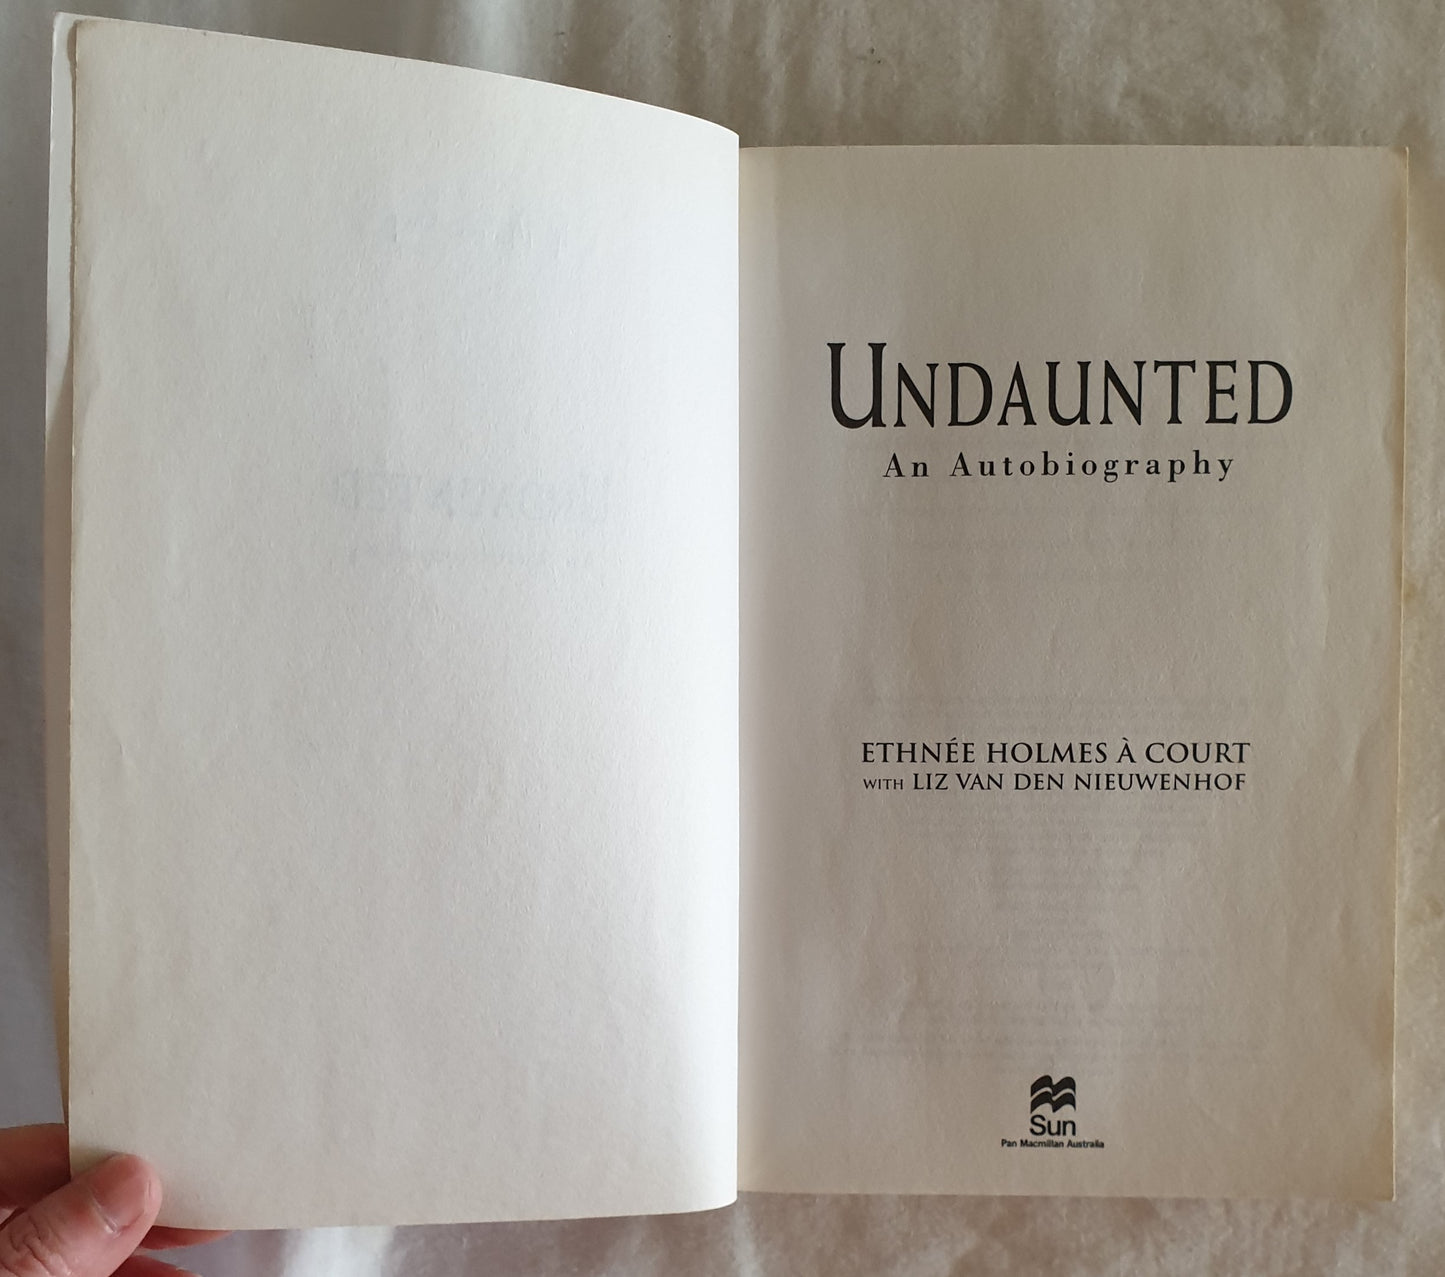 Undaunted by Ethnee Holmes a Court